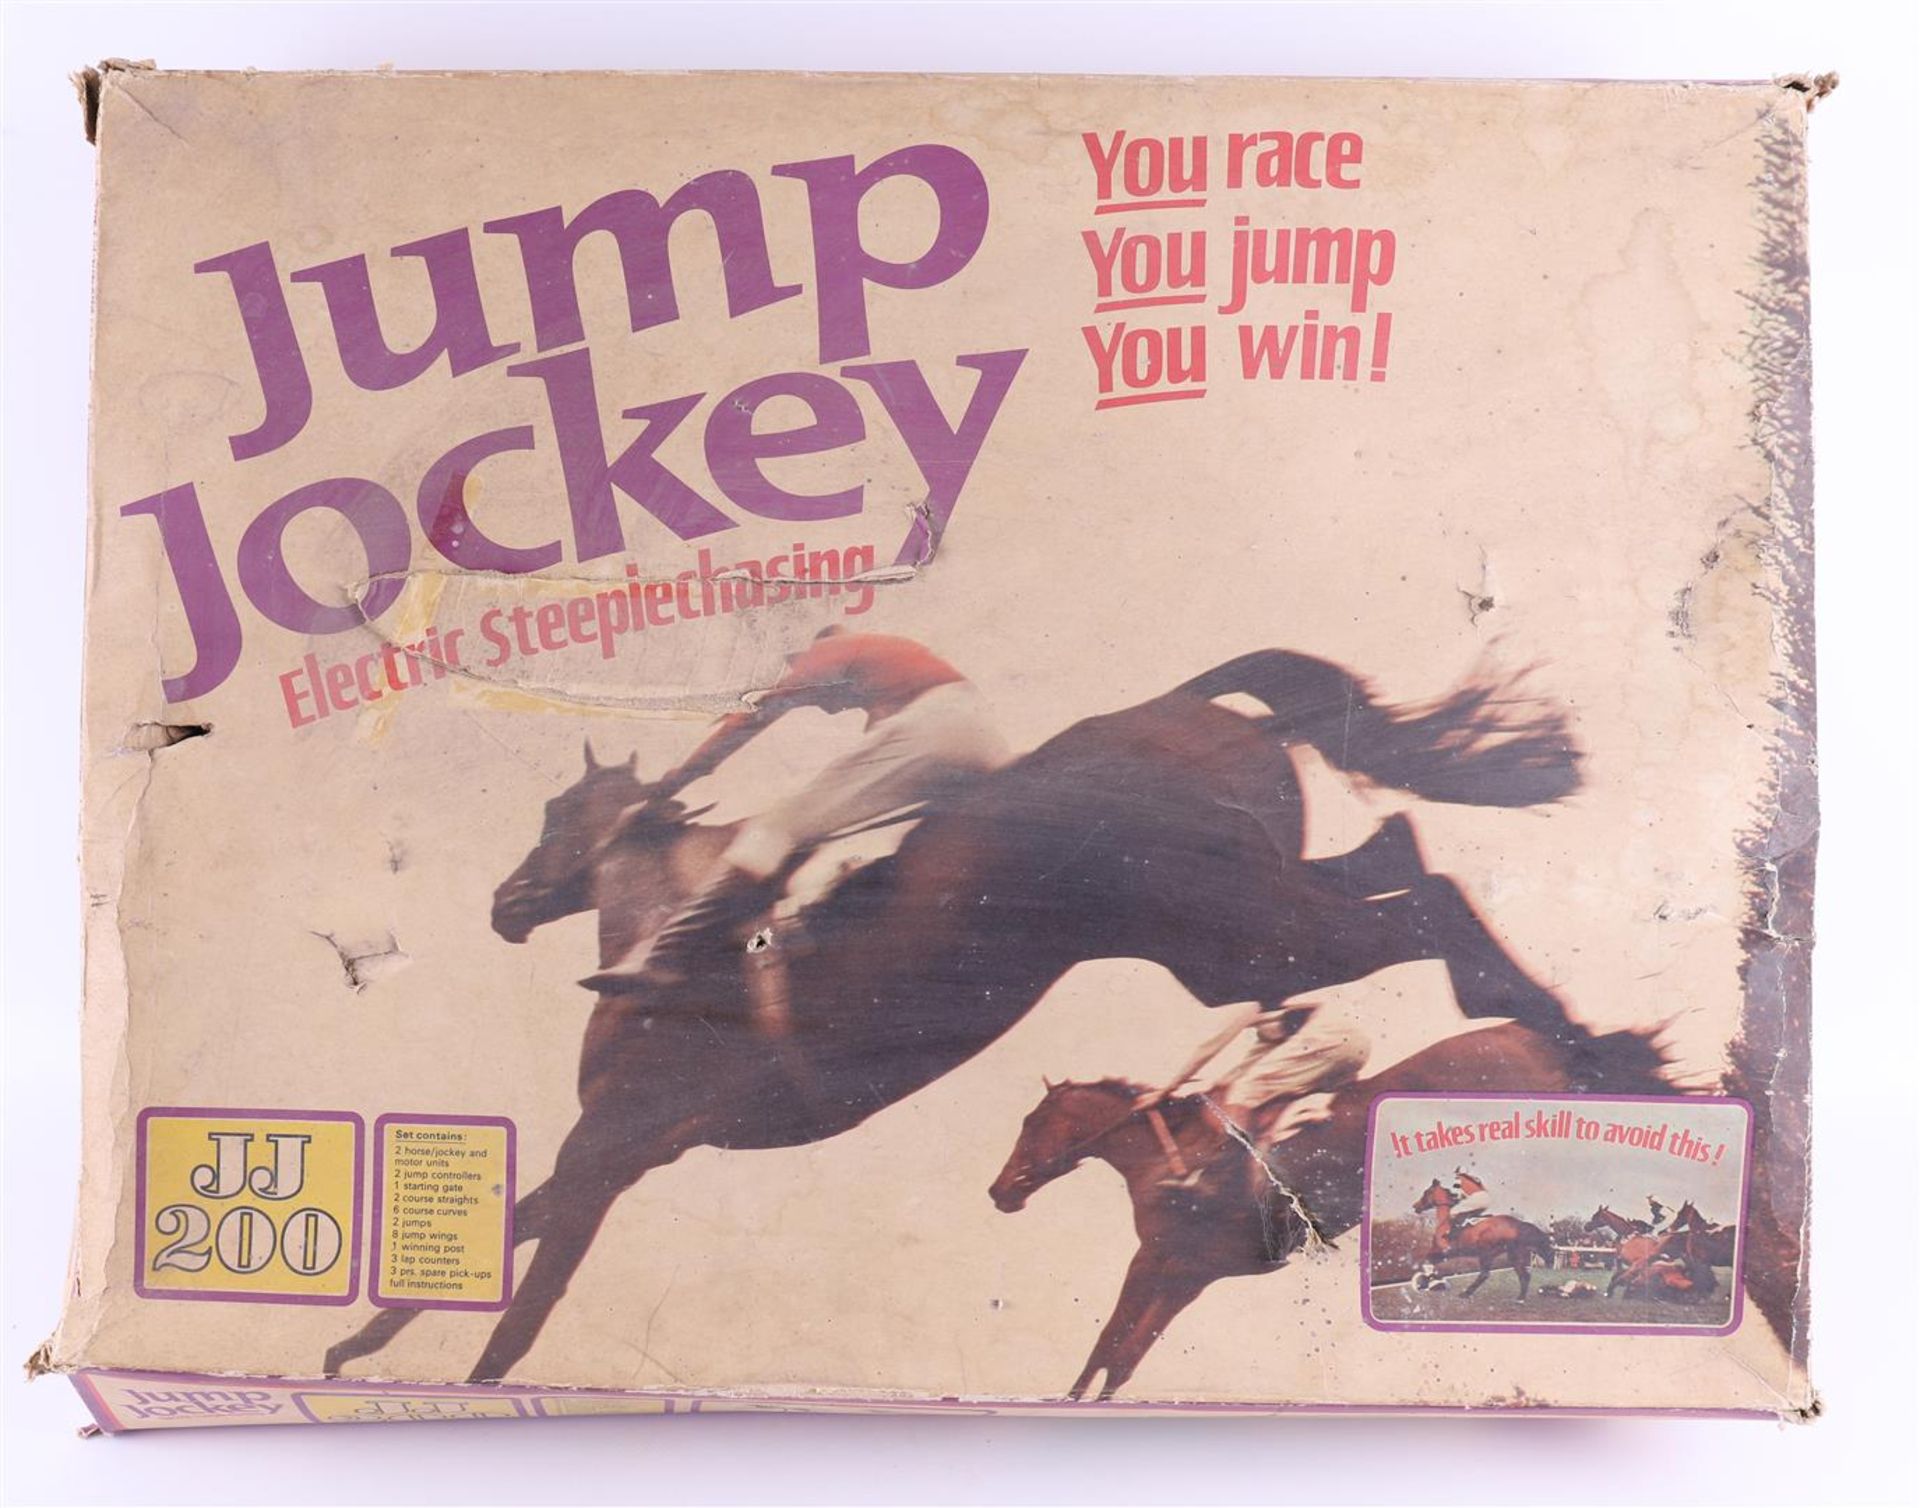 Jump Jockey JJ200 - electric steeple chasings, 1970s. Marked: Triang, British product, in original